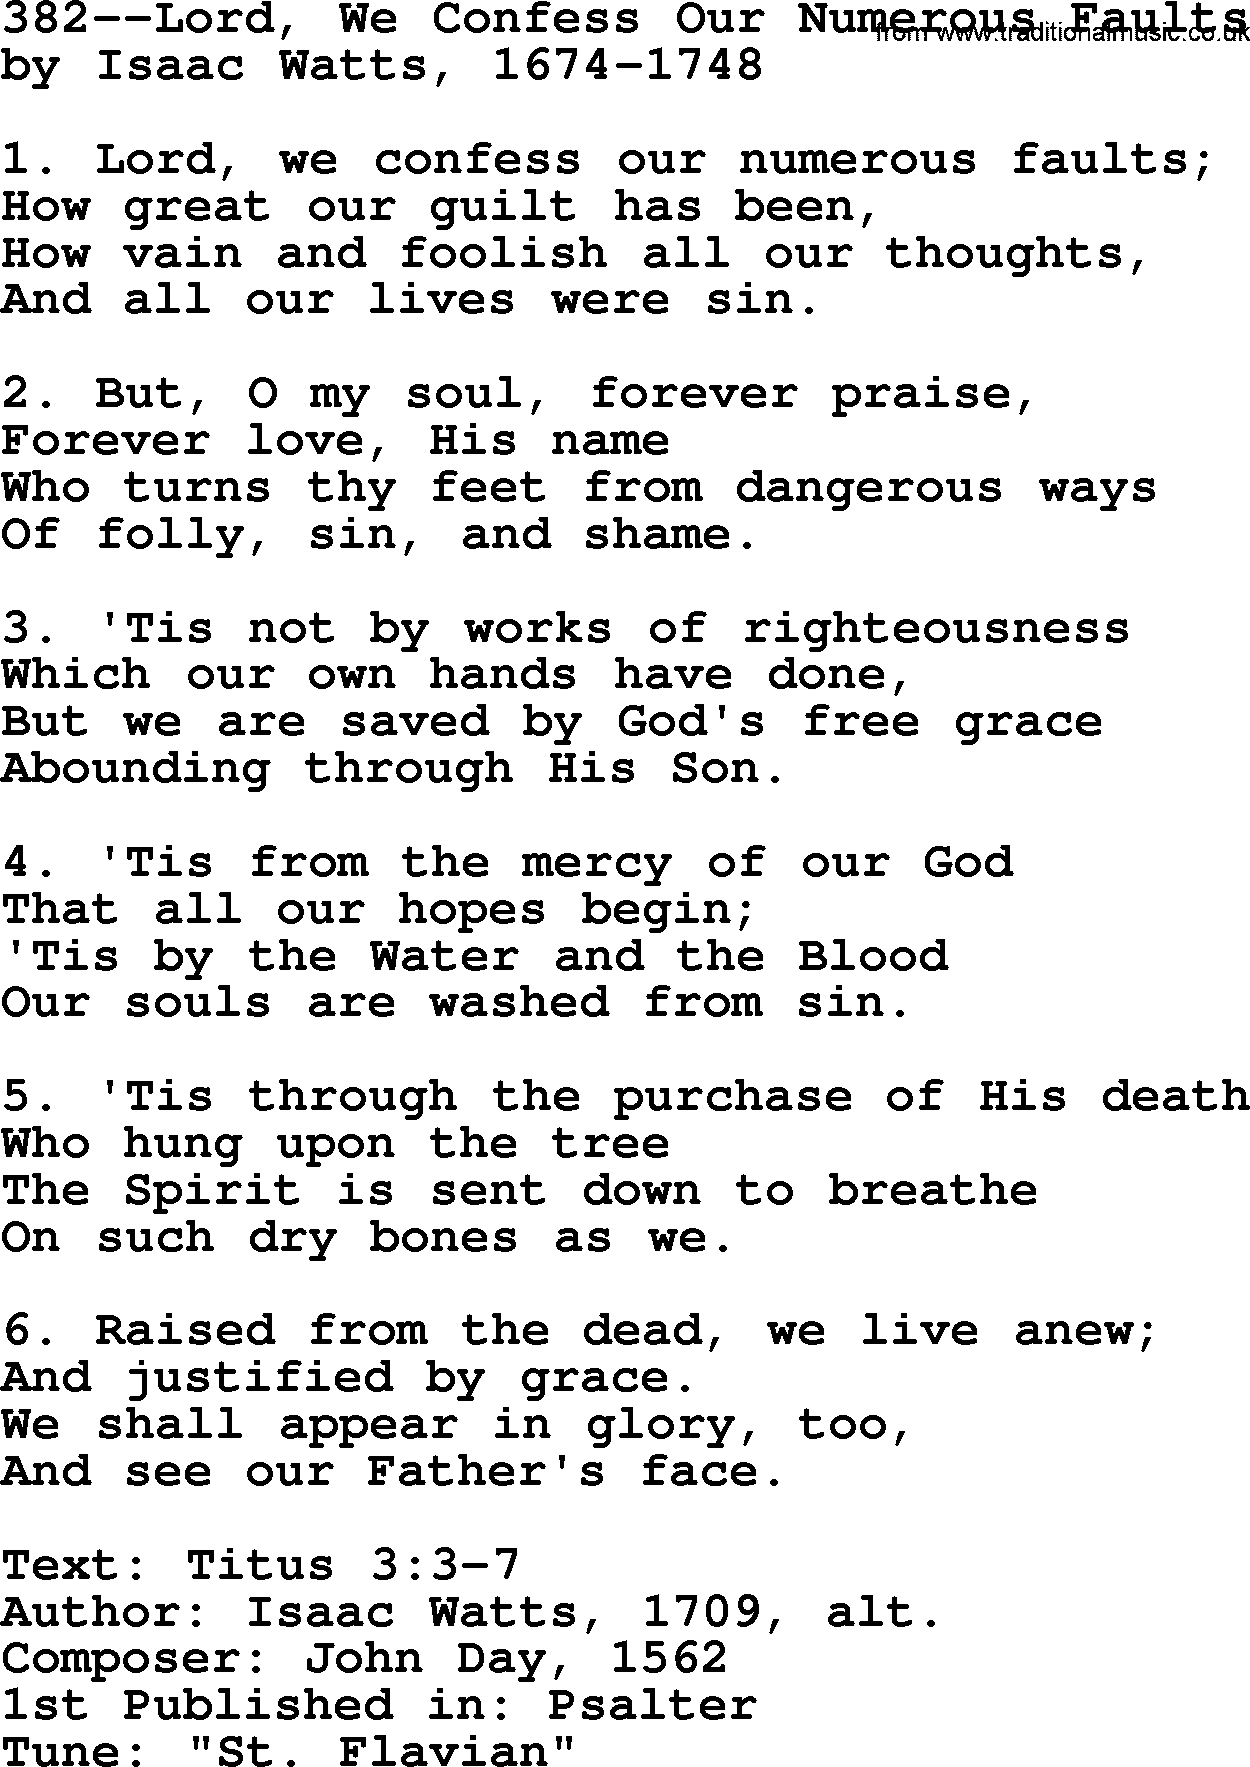 Lutheran Hymn: 382--Lord, We Confess Our Numerous Faults.txt lyrics with PDF